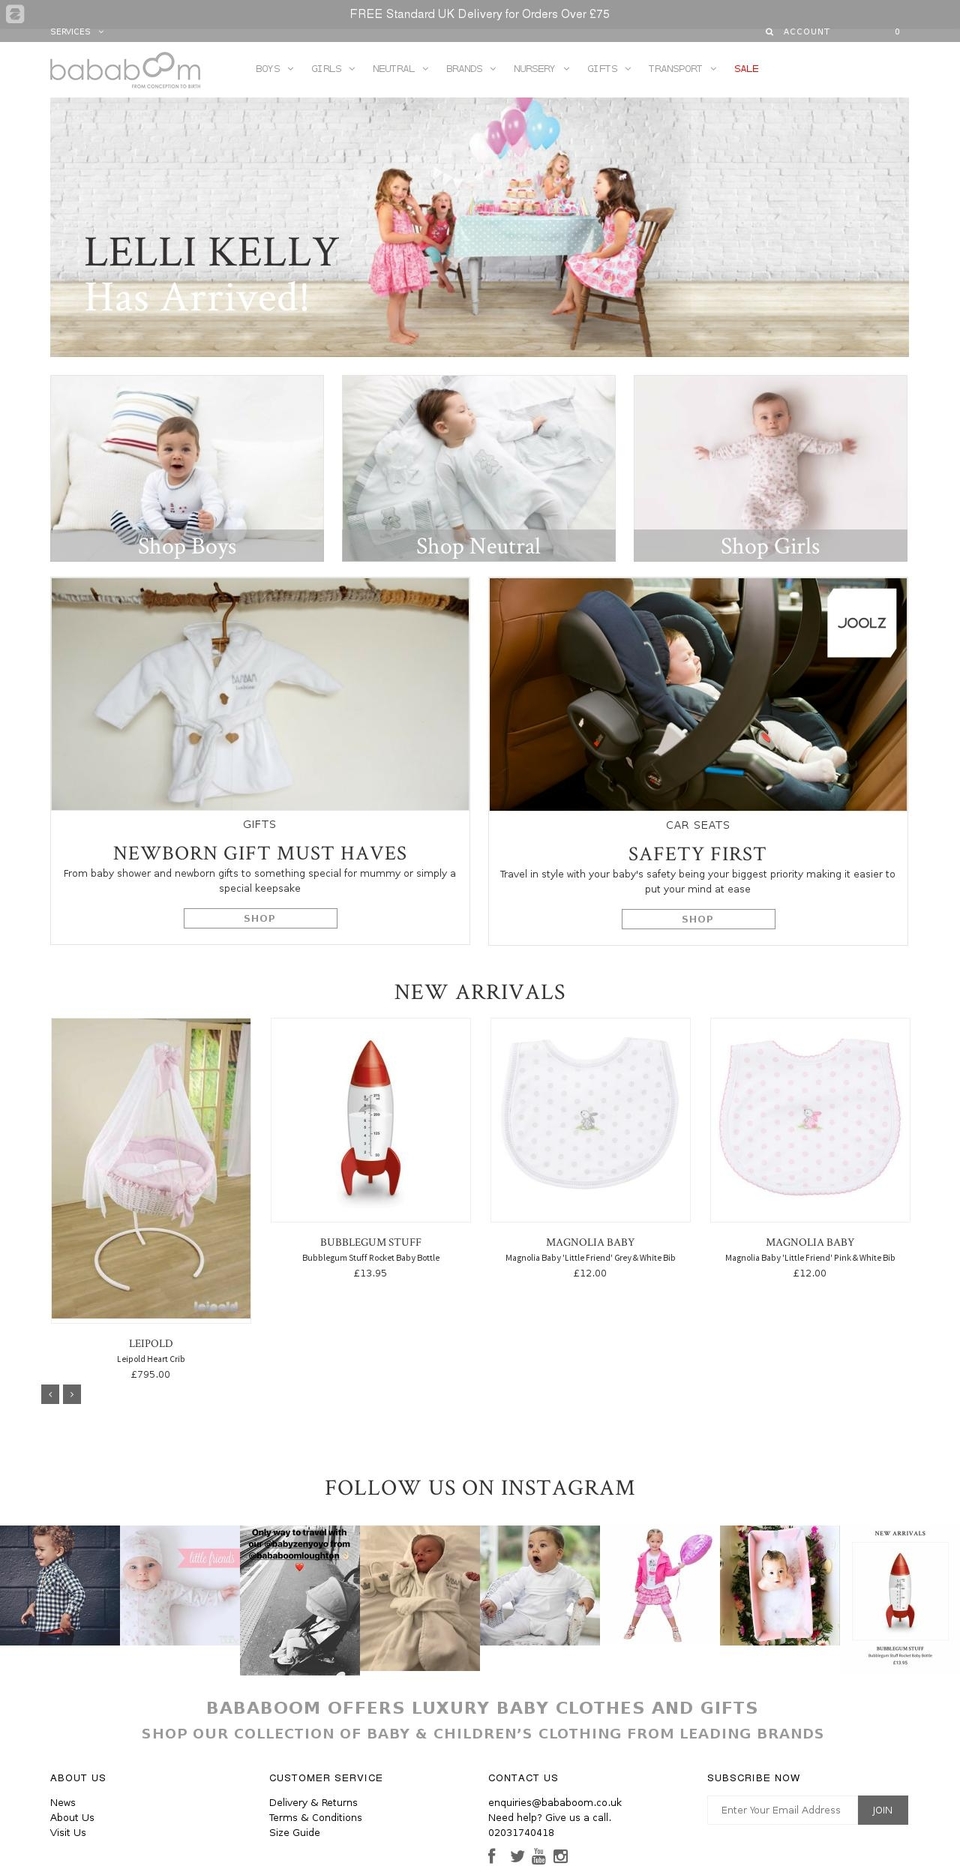 boom Shopify theme site example bababoom-boutique.co.uk